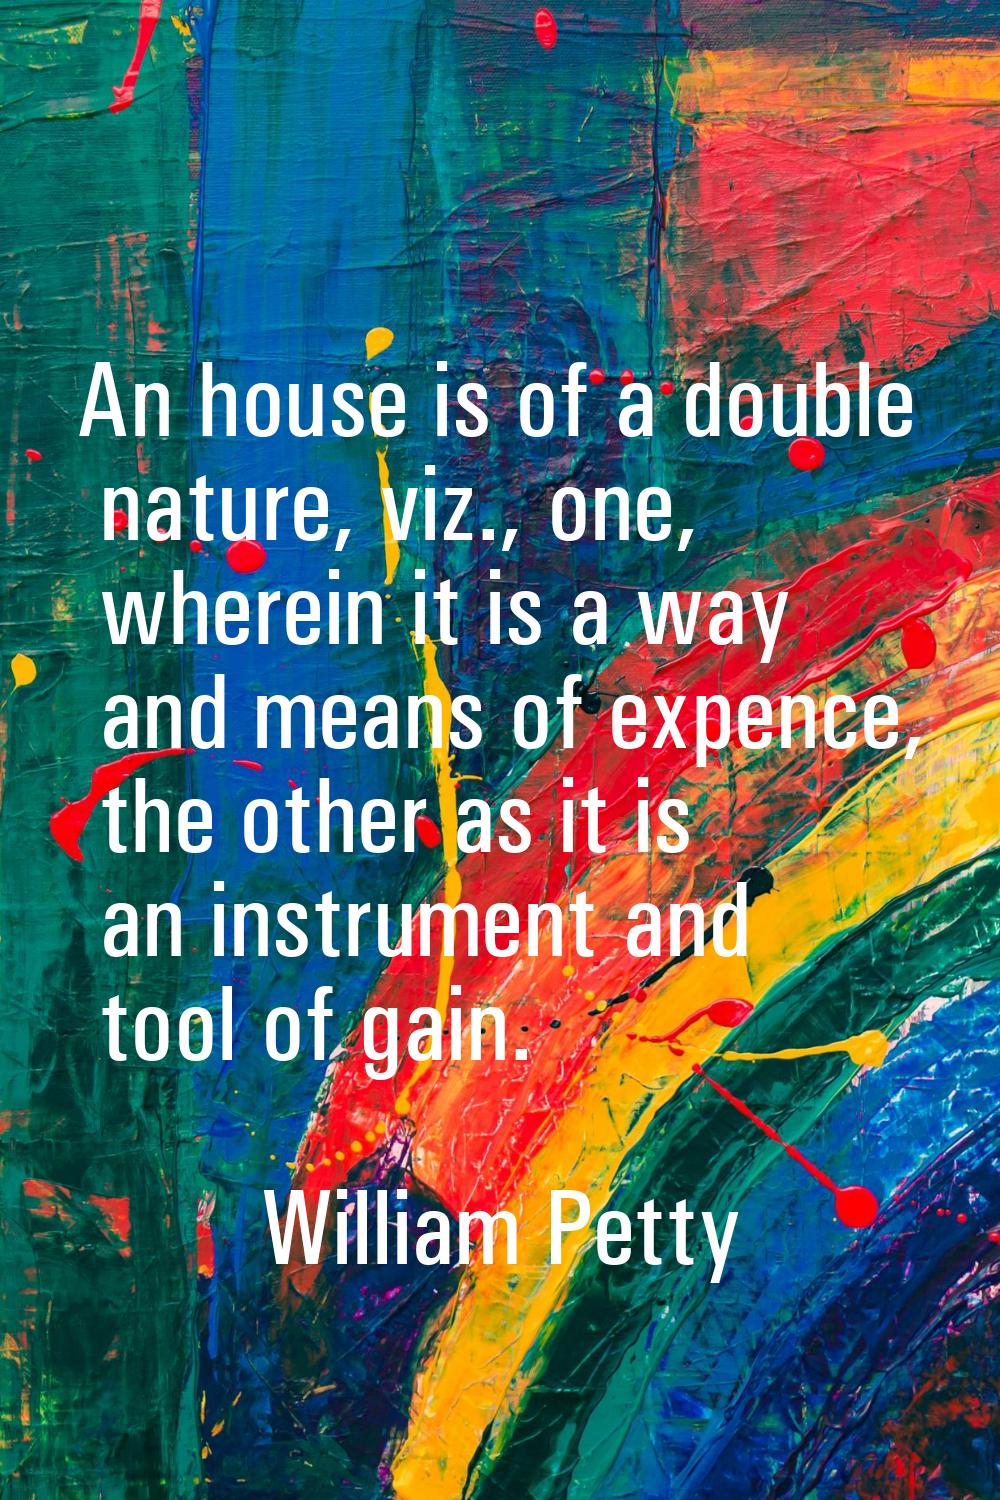 An house is of a double nature, viz., one, wherein it is a way and means of expence, the other as i